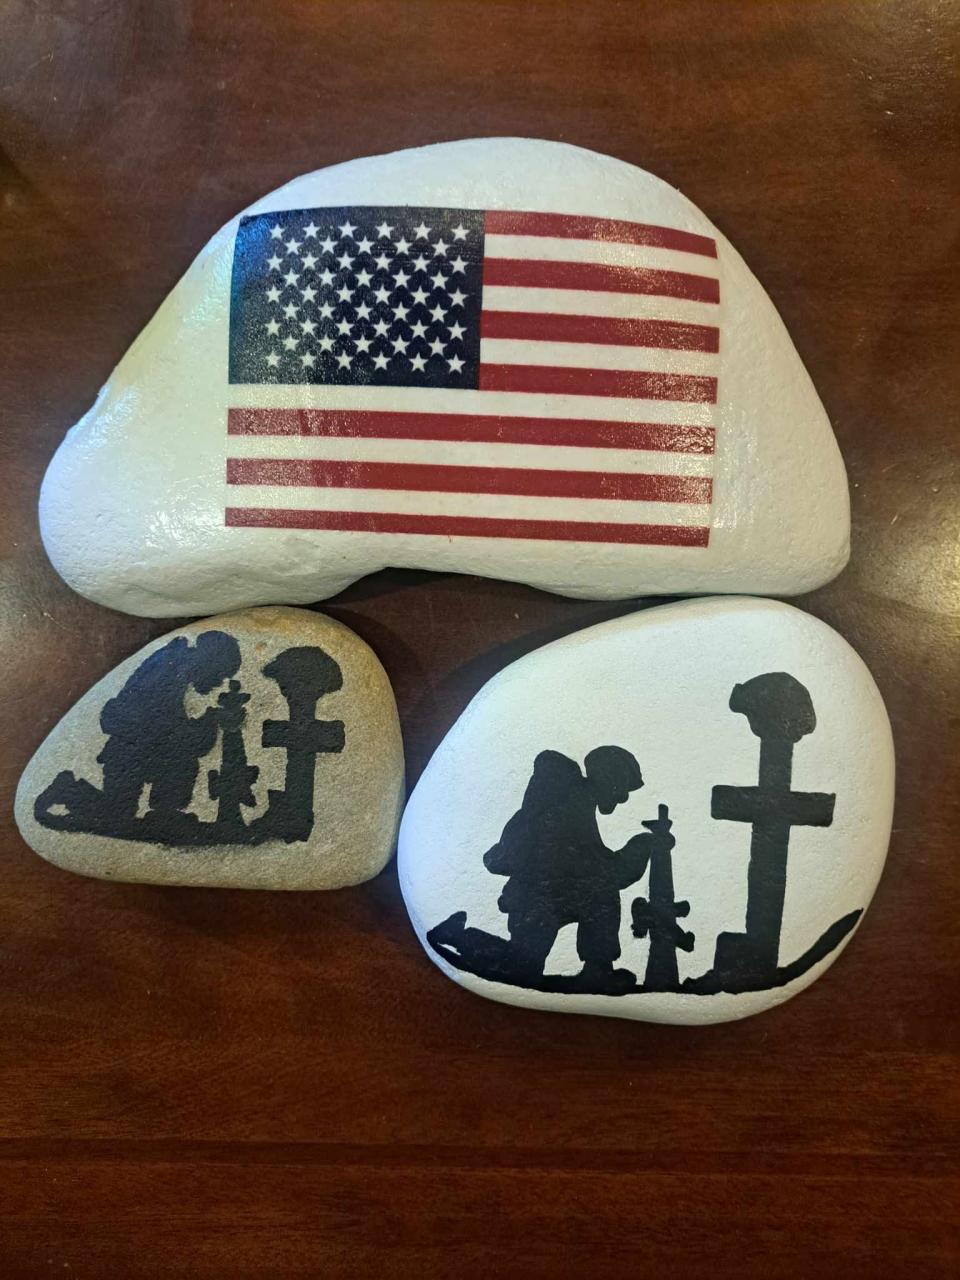 Lisa and Chris Patterson, members of the HVL Rocks Facebook group, are delivering rocks painted with veterans' themes to the Veterans Healing Farm on Oct. 31.